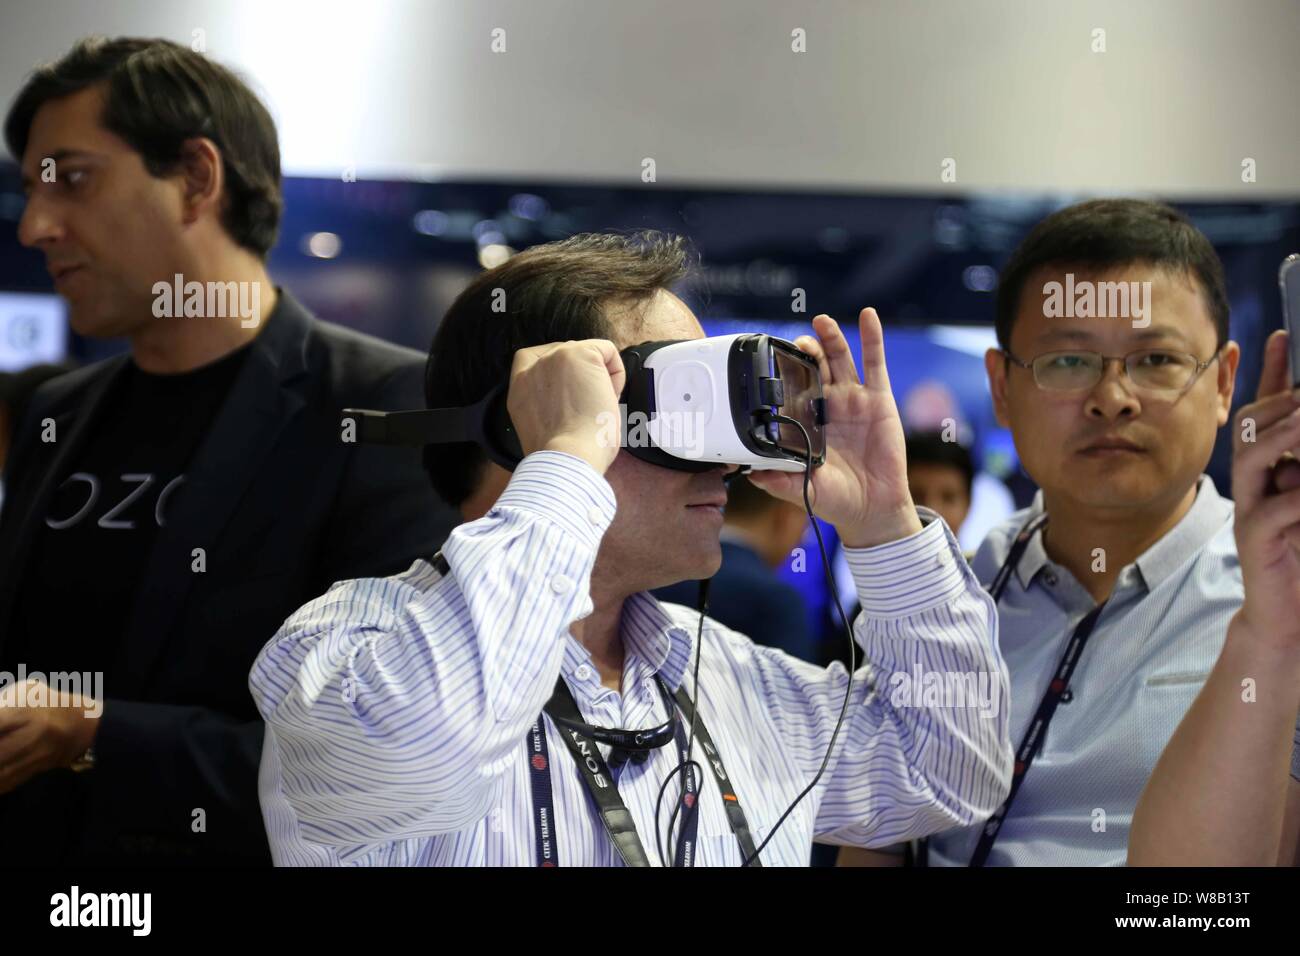 A visitor tries out an HTC VR (Virtual Reality) device during the 2016 Mobile World Congress (MWC) in Shanghai, China, 29 June 2016.   The Mobile Worl Stock Photo